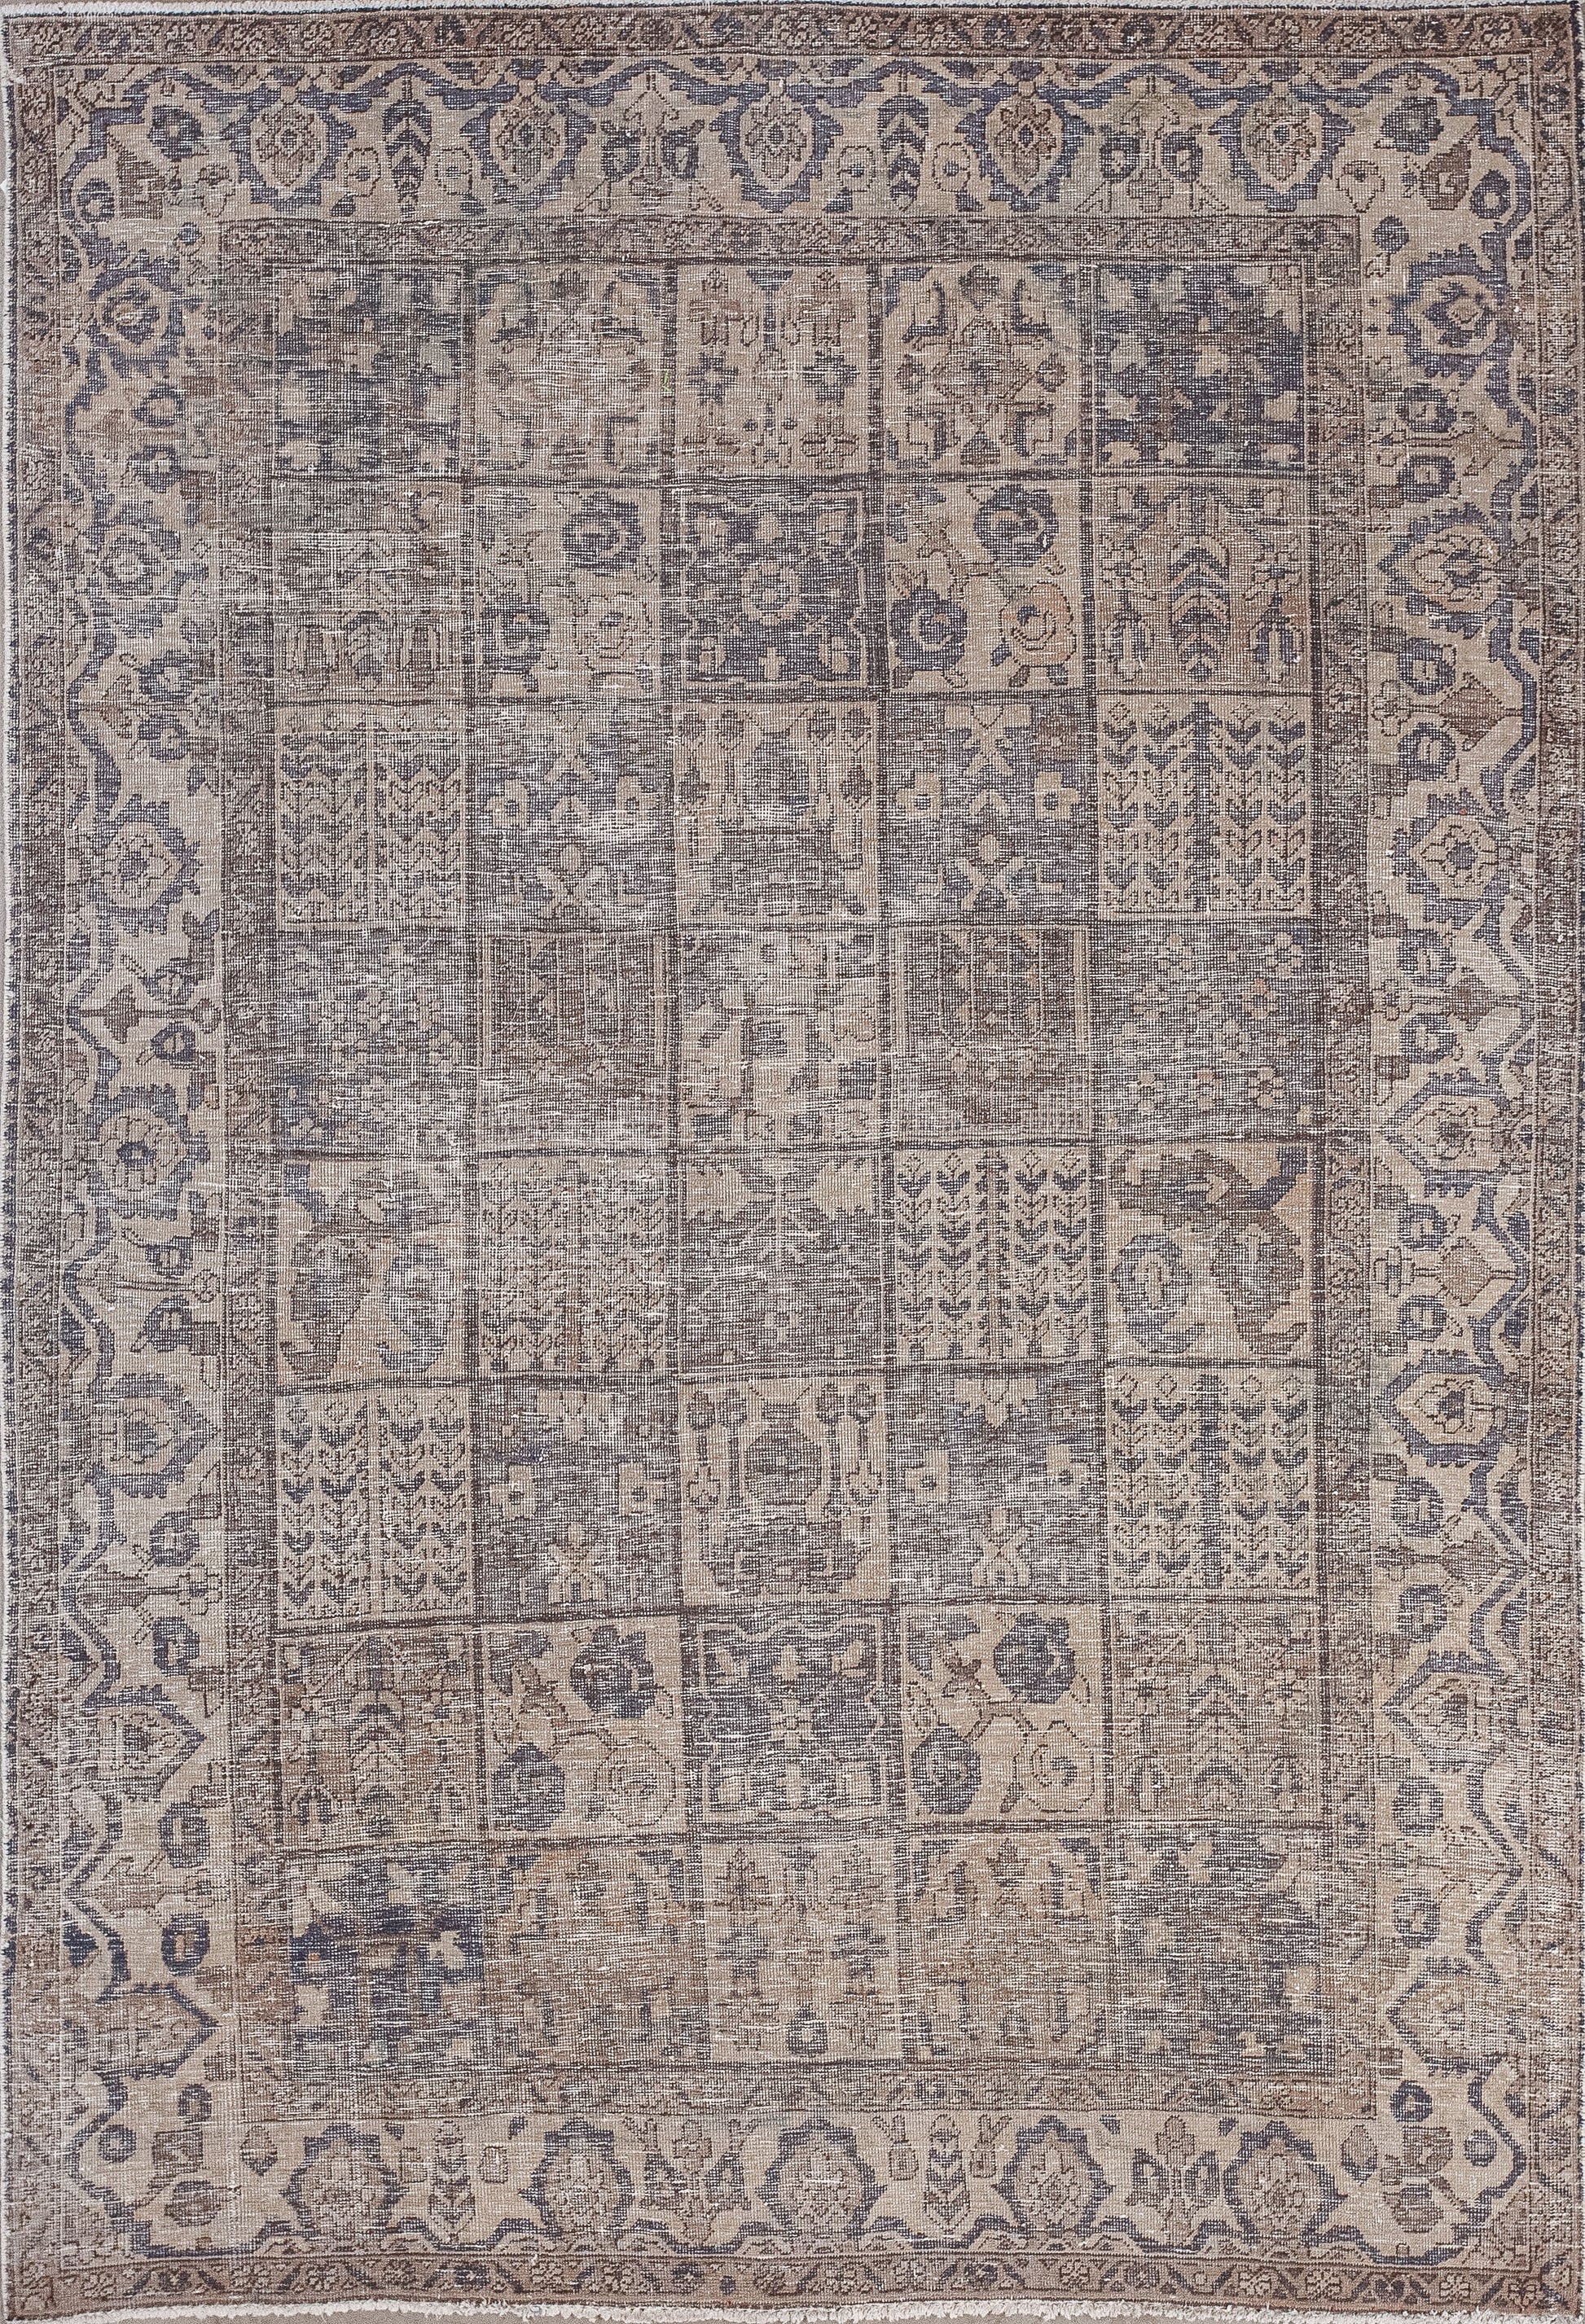 Vintage rug comes with a story within its threads. The dim color scheme has khaki background, blue and brown pattern.